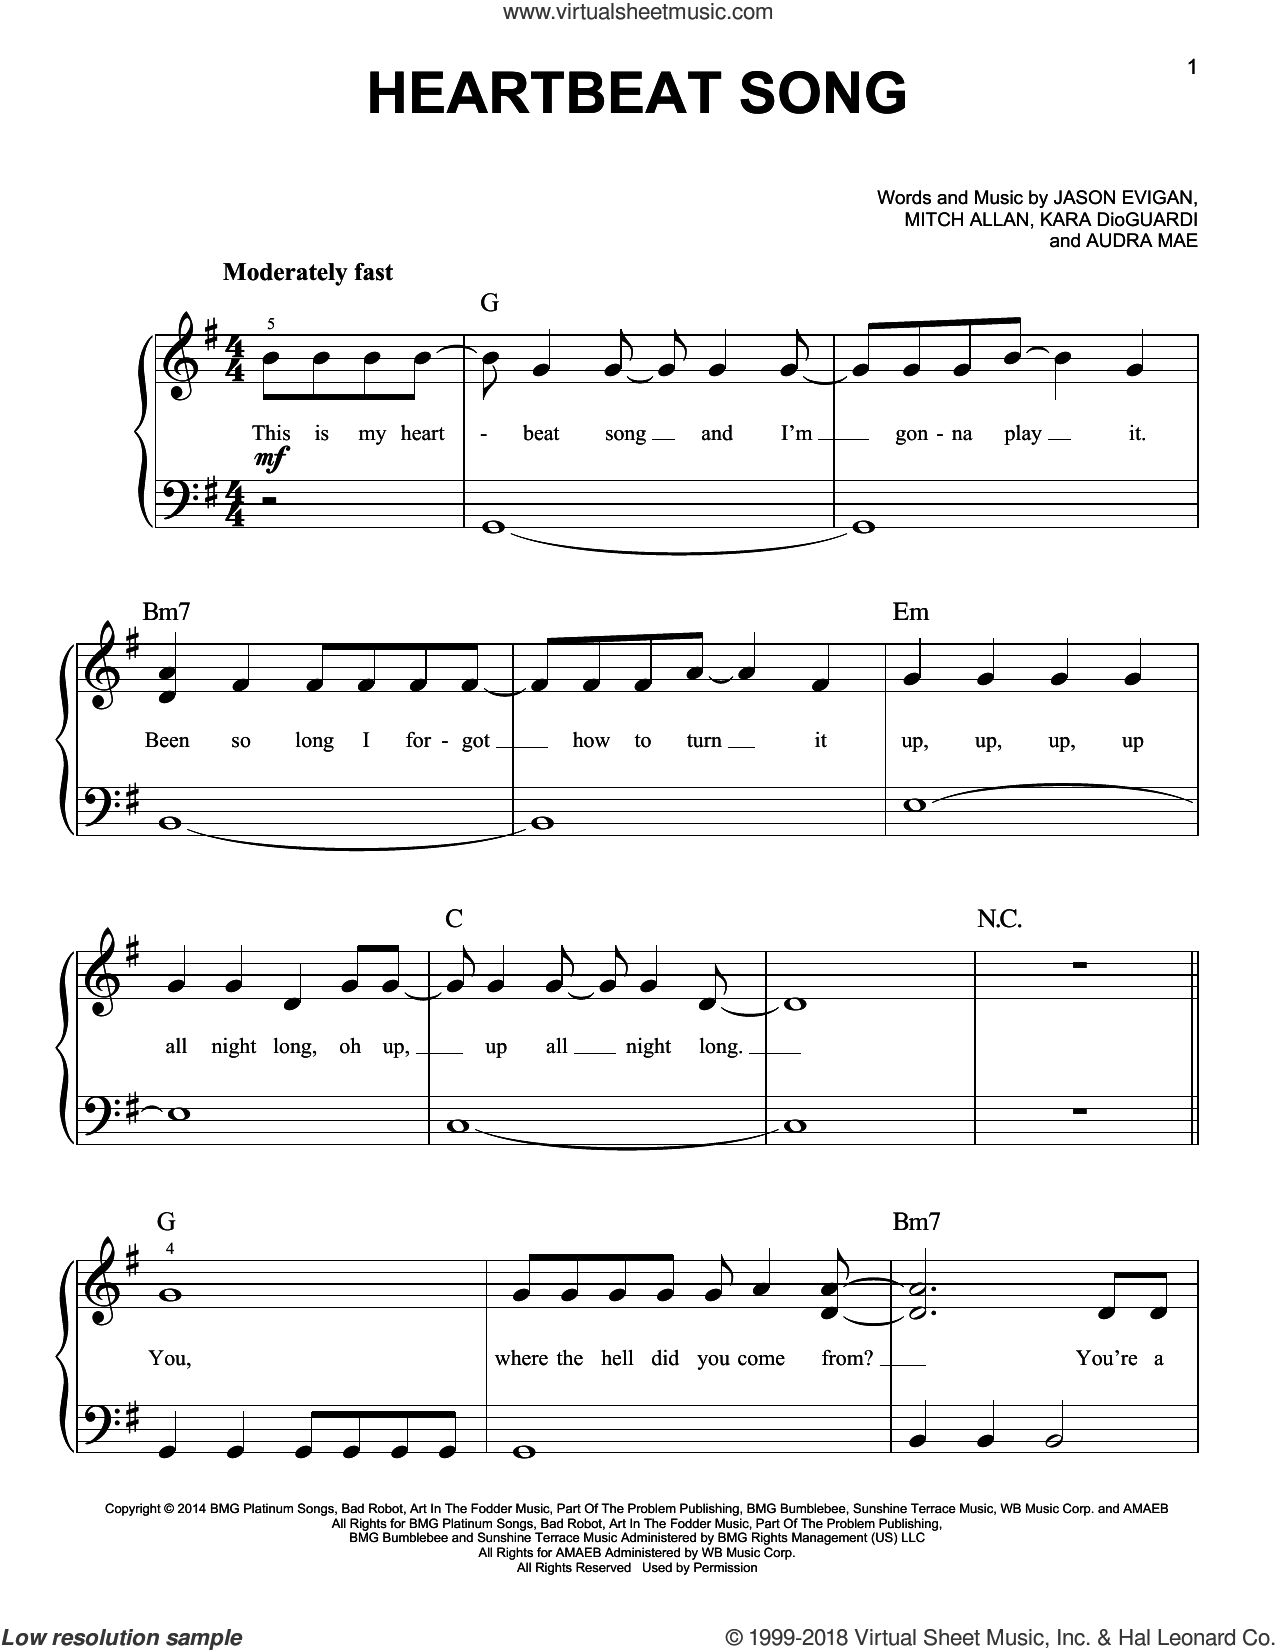 Clarkson - Heartbeat Song sheet music (beginner) for piano solo